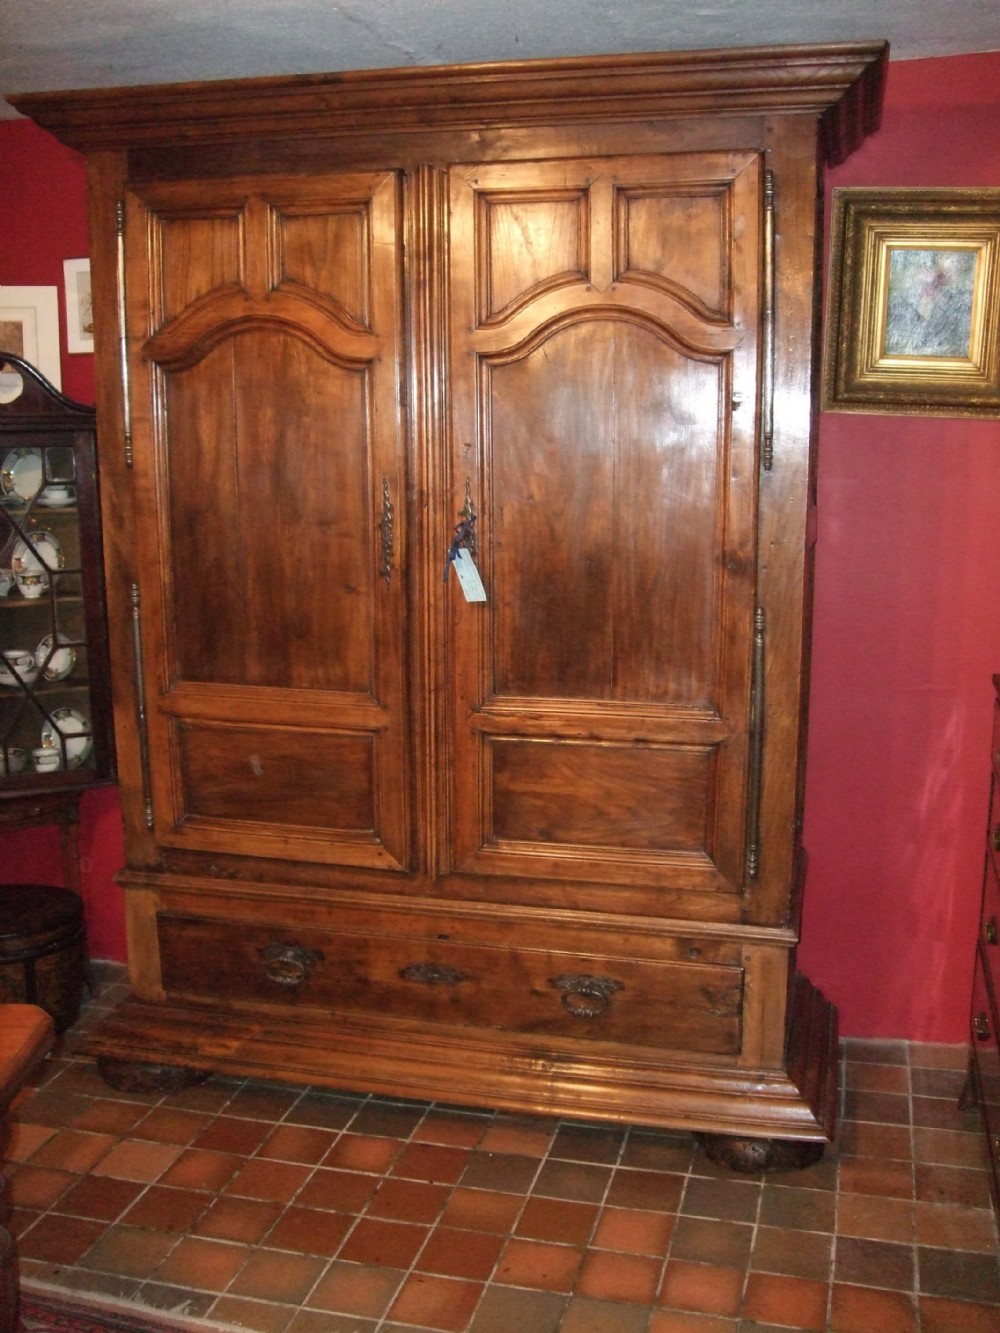 17th18th french oak chestnut walnut armoire possibly corsican